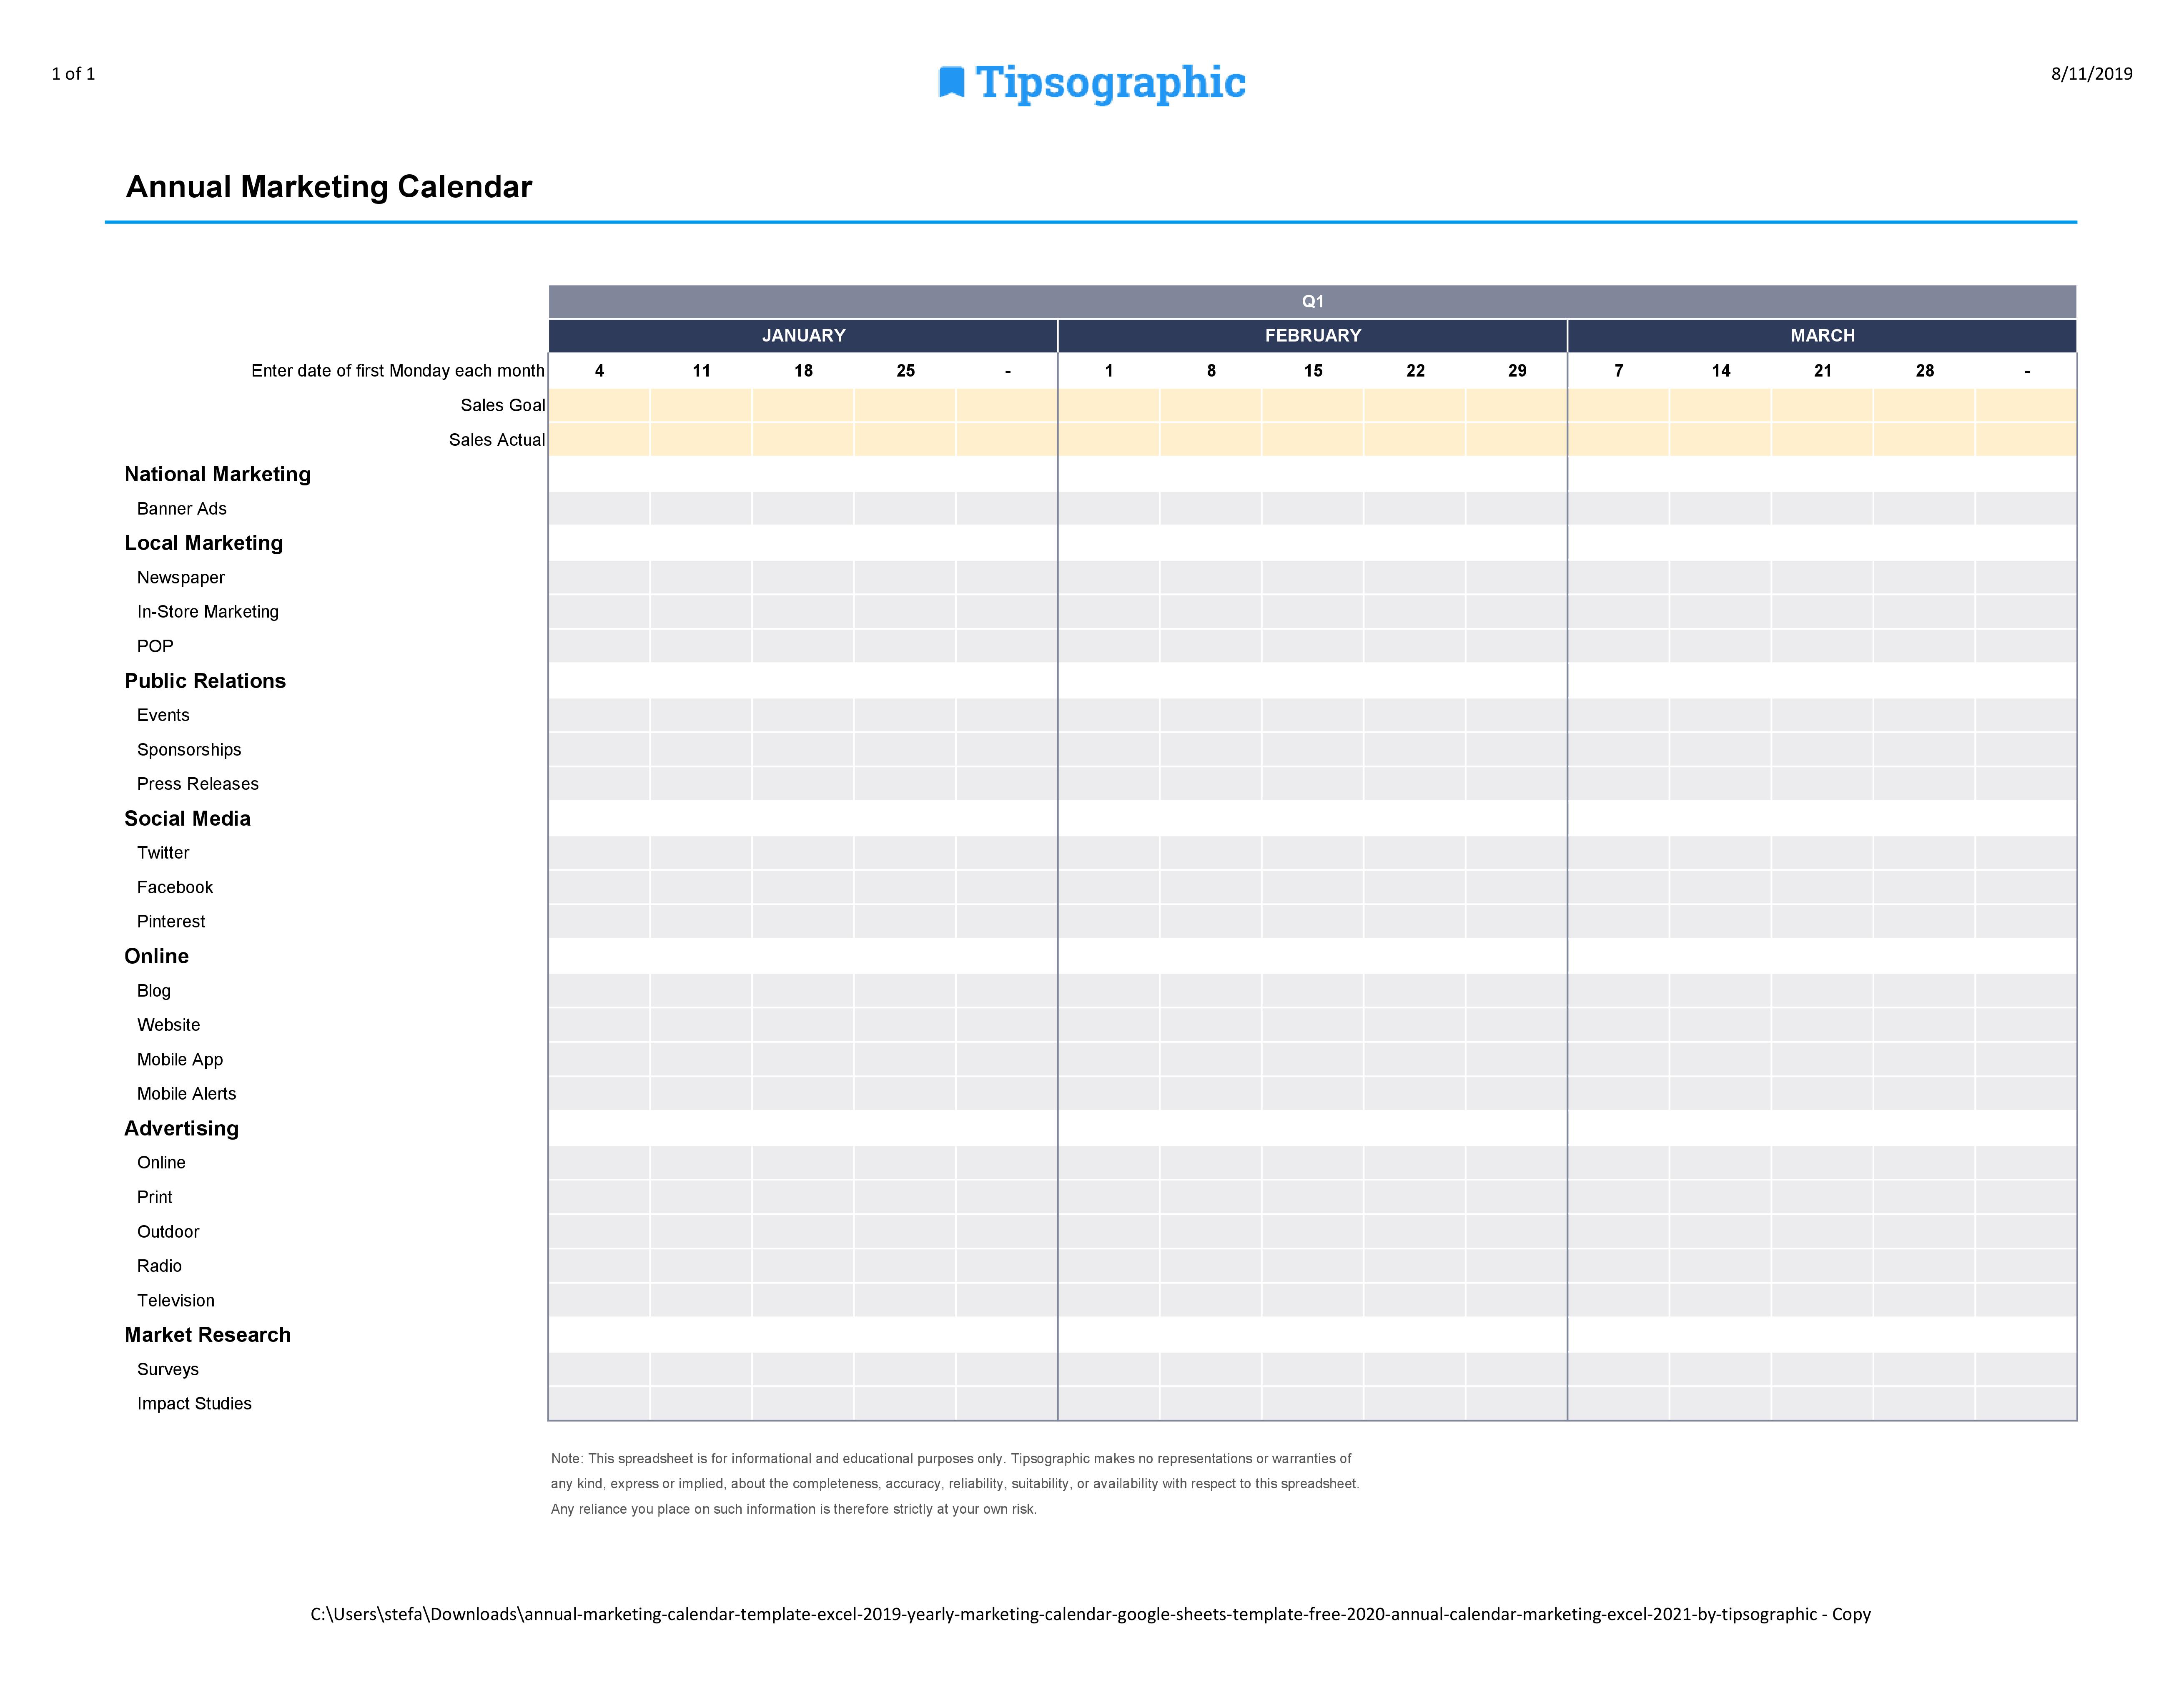 Download Annual Marketing Calendar Template for Excel and Google Sheets